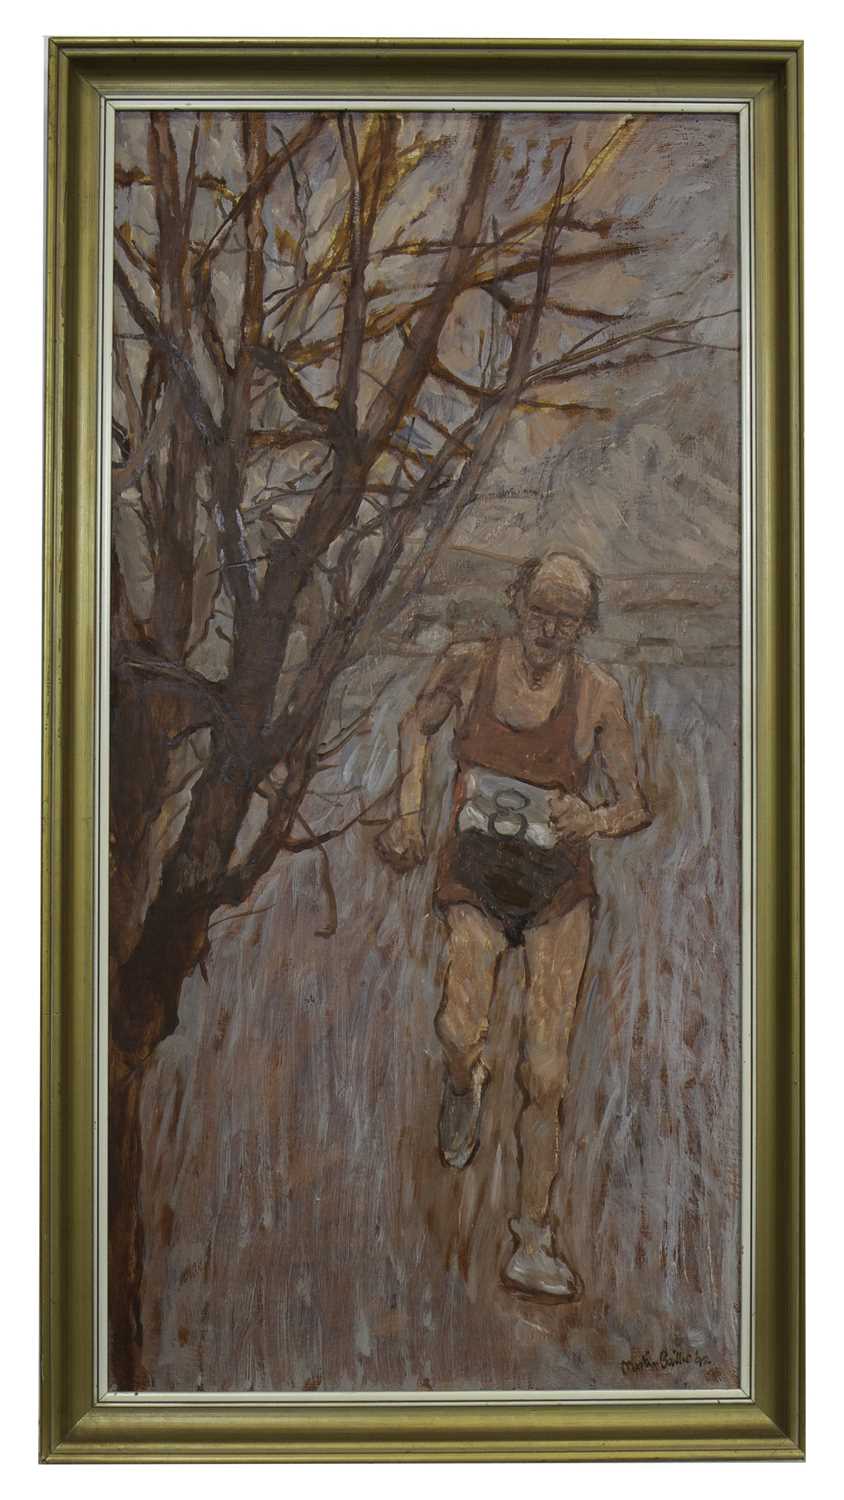 Lot 661 - THE RUNNER, AN OIL BY MARTIN BAILLIE